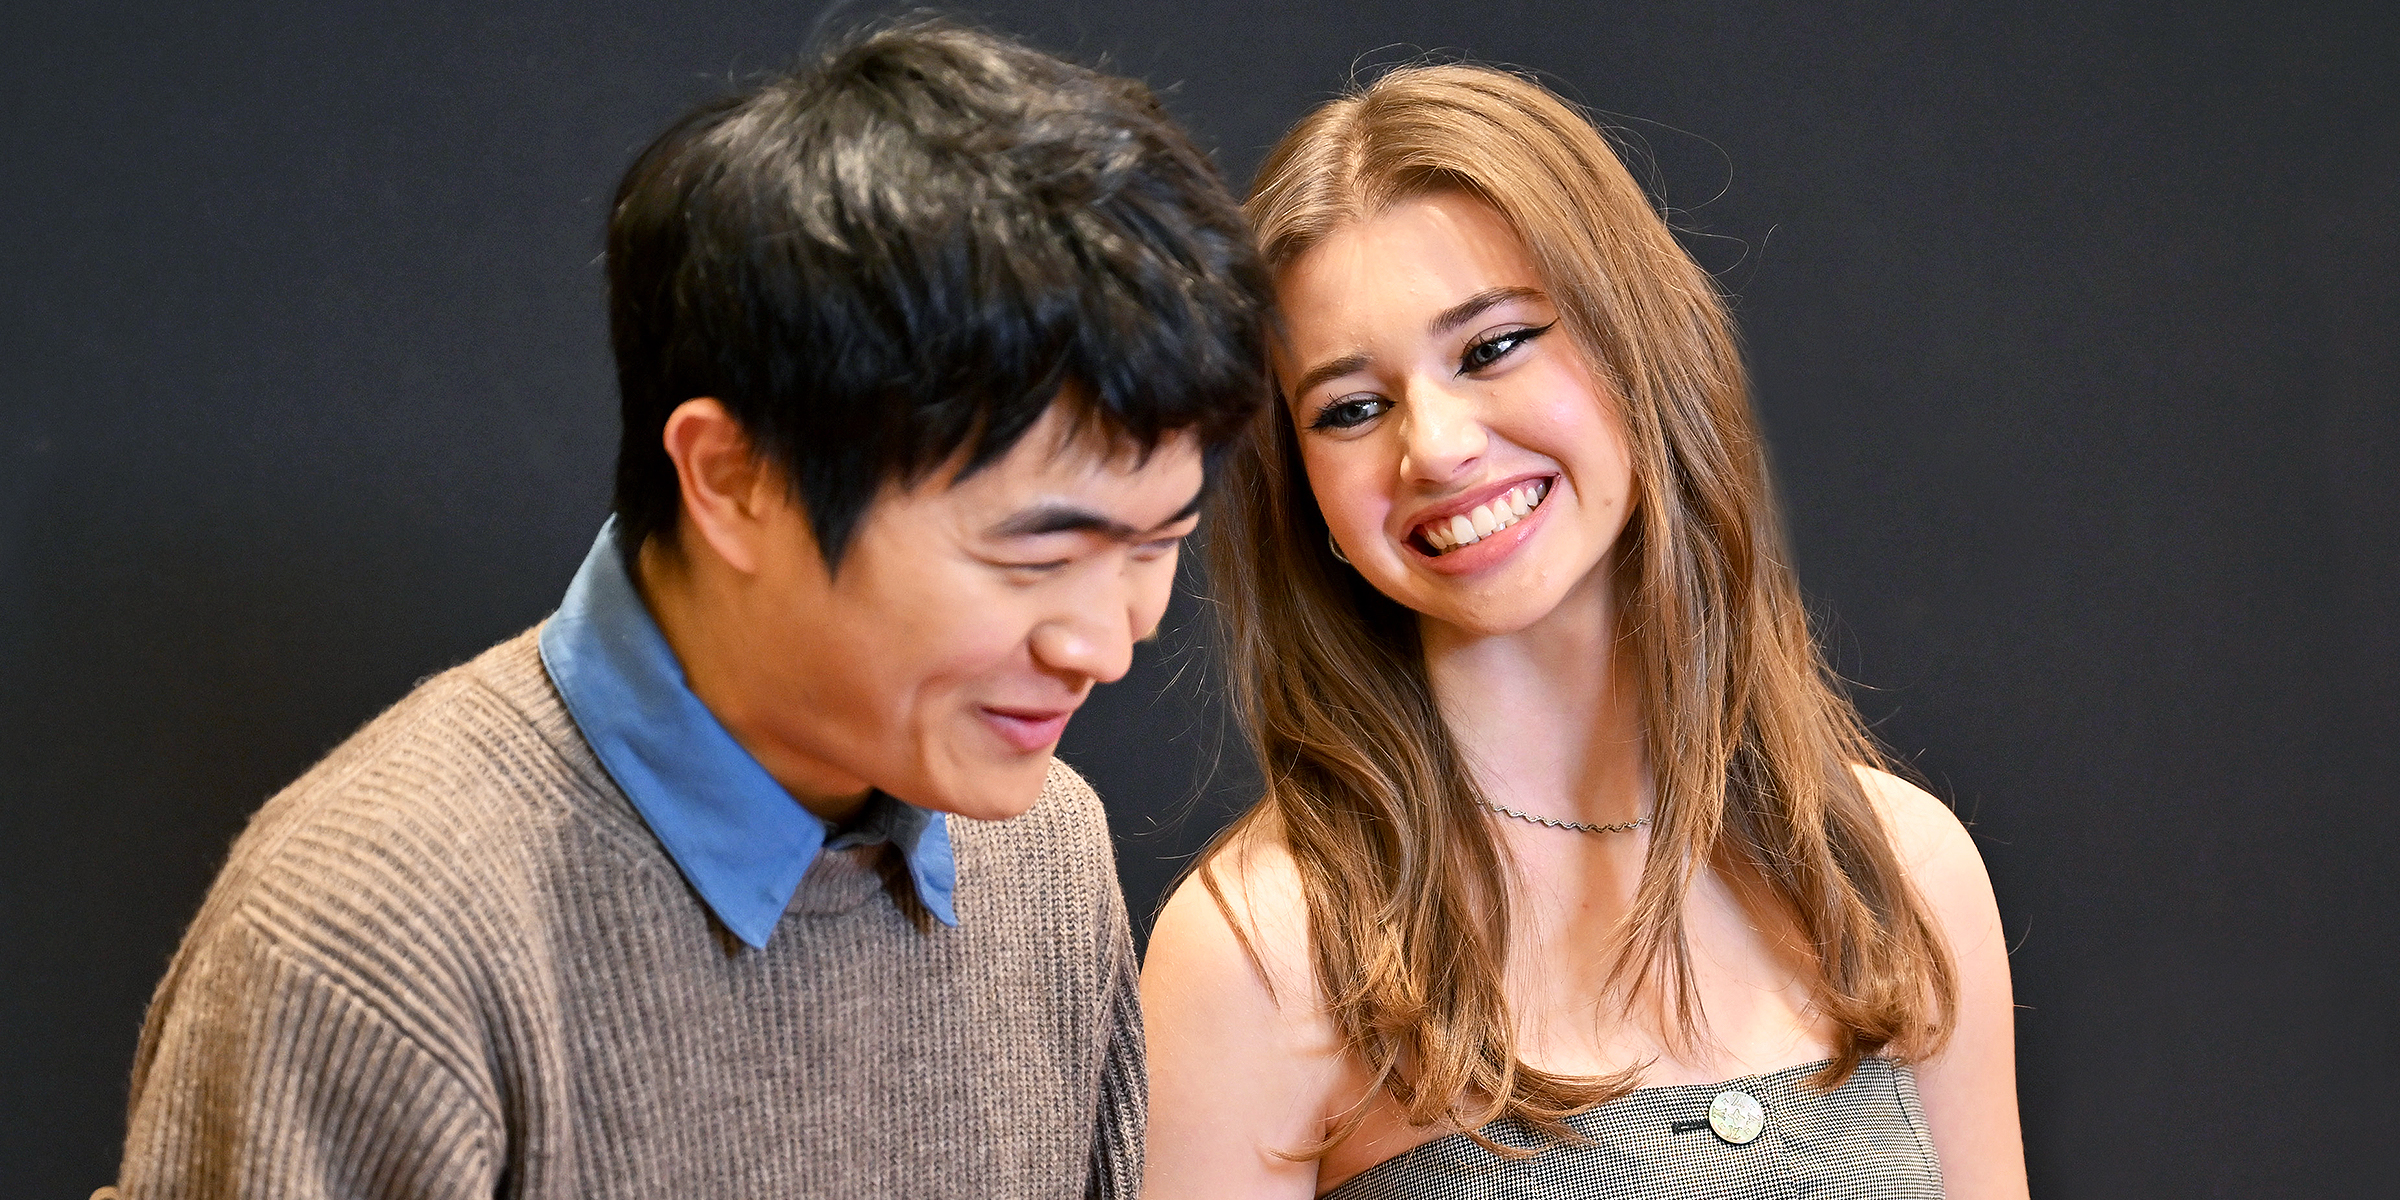 Ben Wang and Sydney Taylor | Source: Getty Images